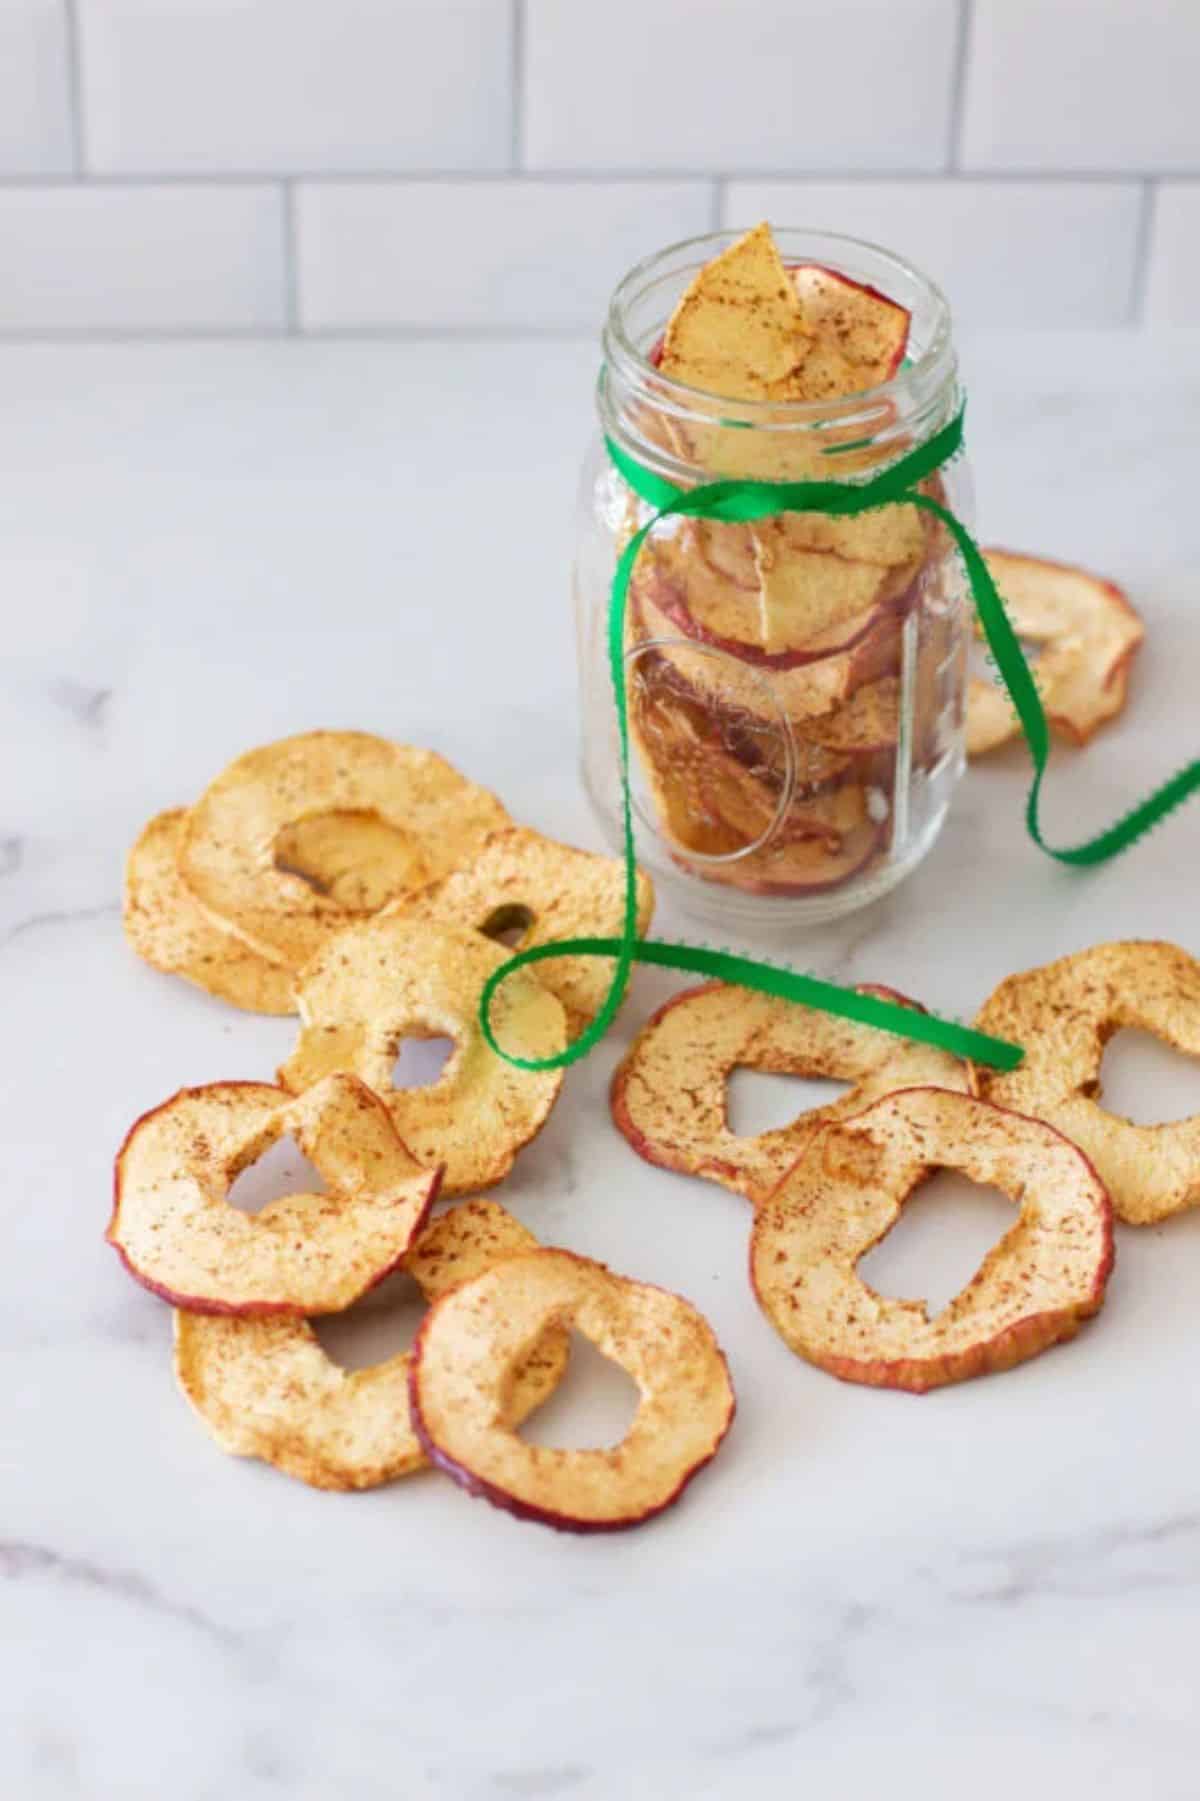 Dehydrated cinnamon apple in a glass jar and scattered on a table.